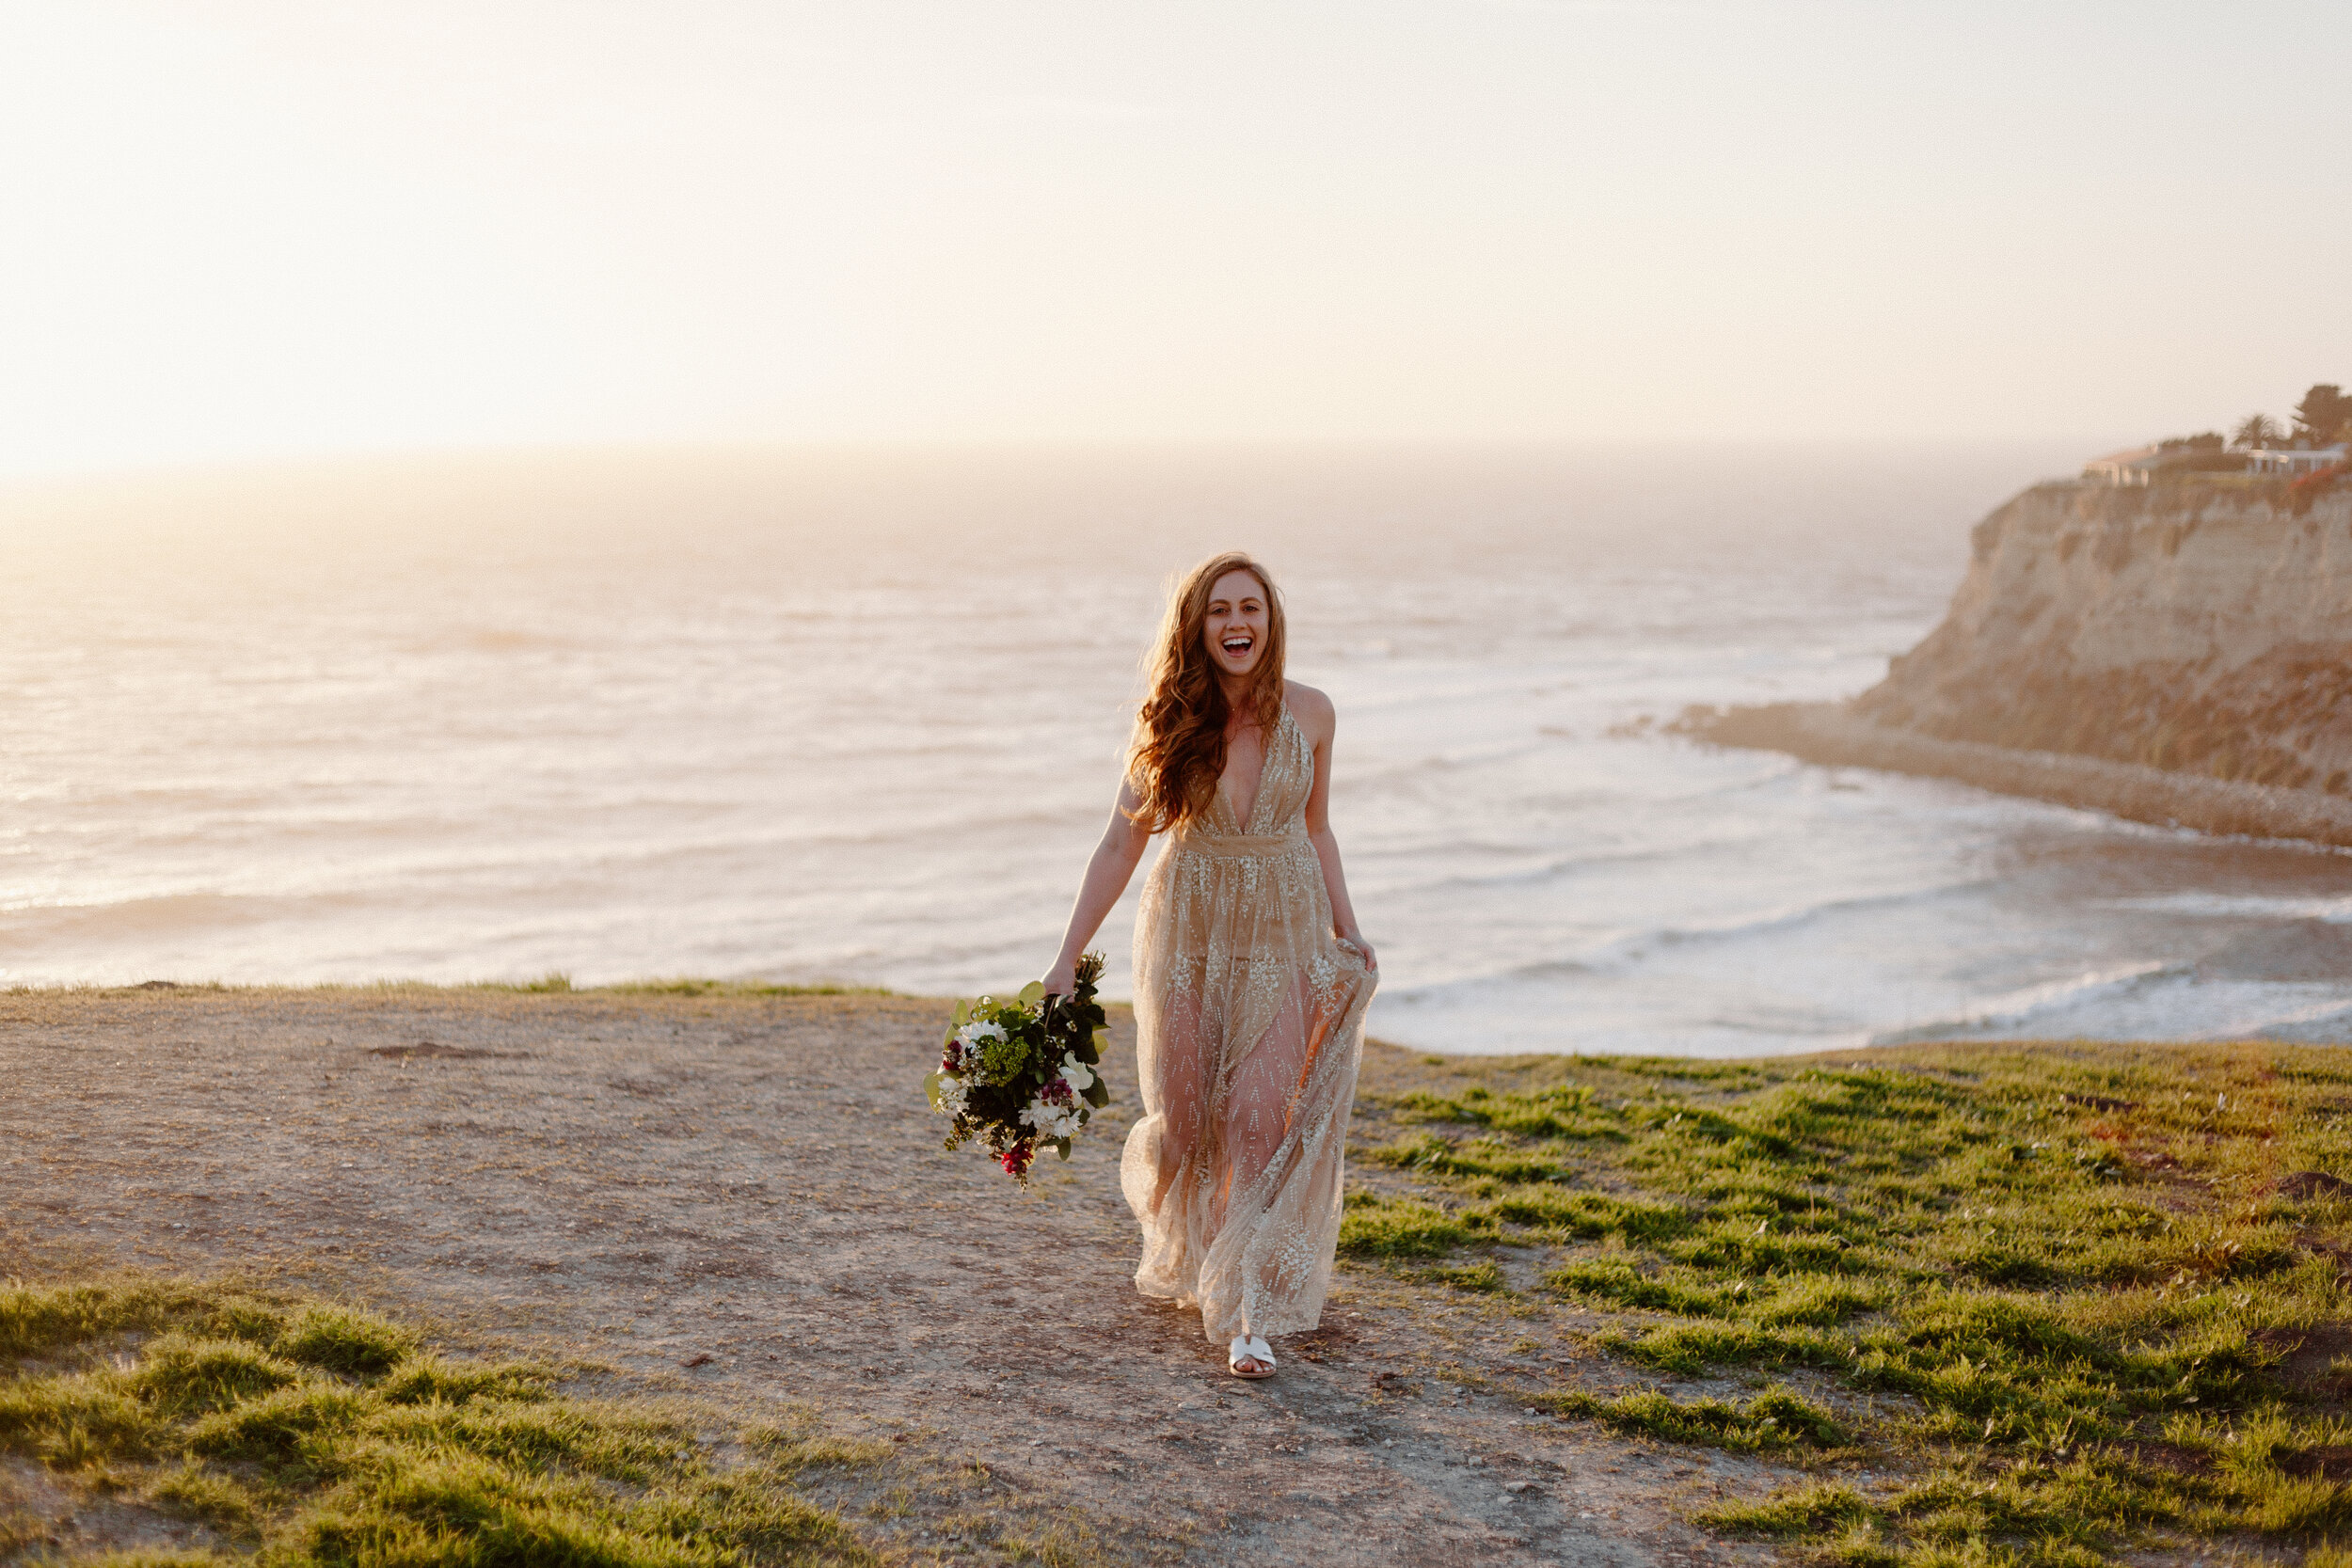 Warm portrait from a bridal shoot at Lunda Bay Beach in Lunada Bay, California during sunset. The model was wearing a sequined sheer dress that contrasted the natural beachfront cliffs.